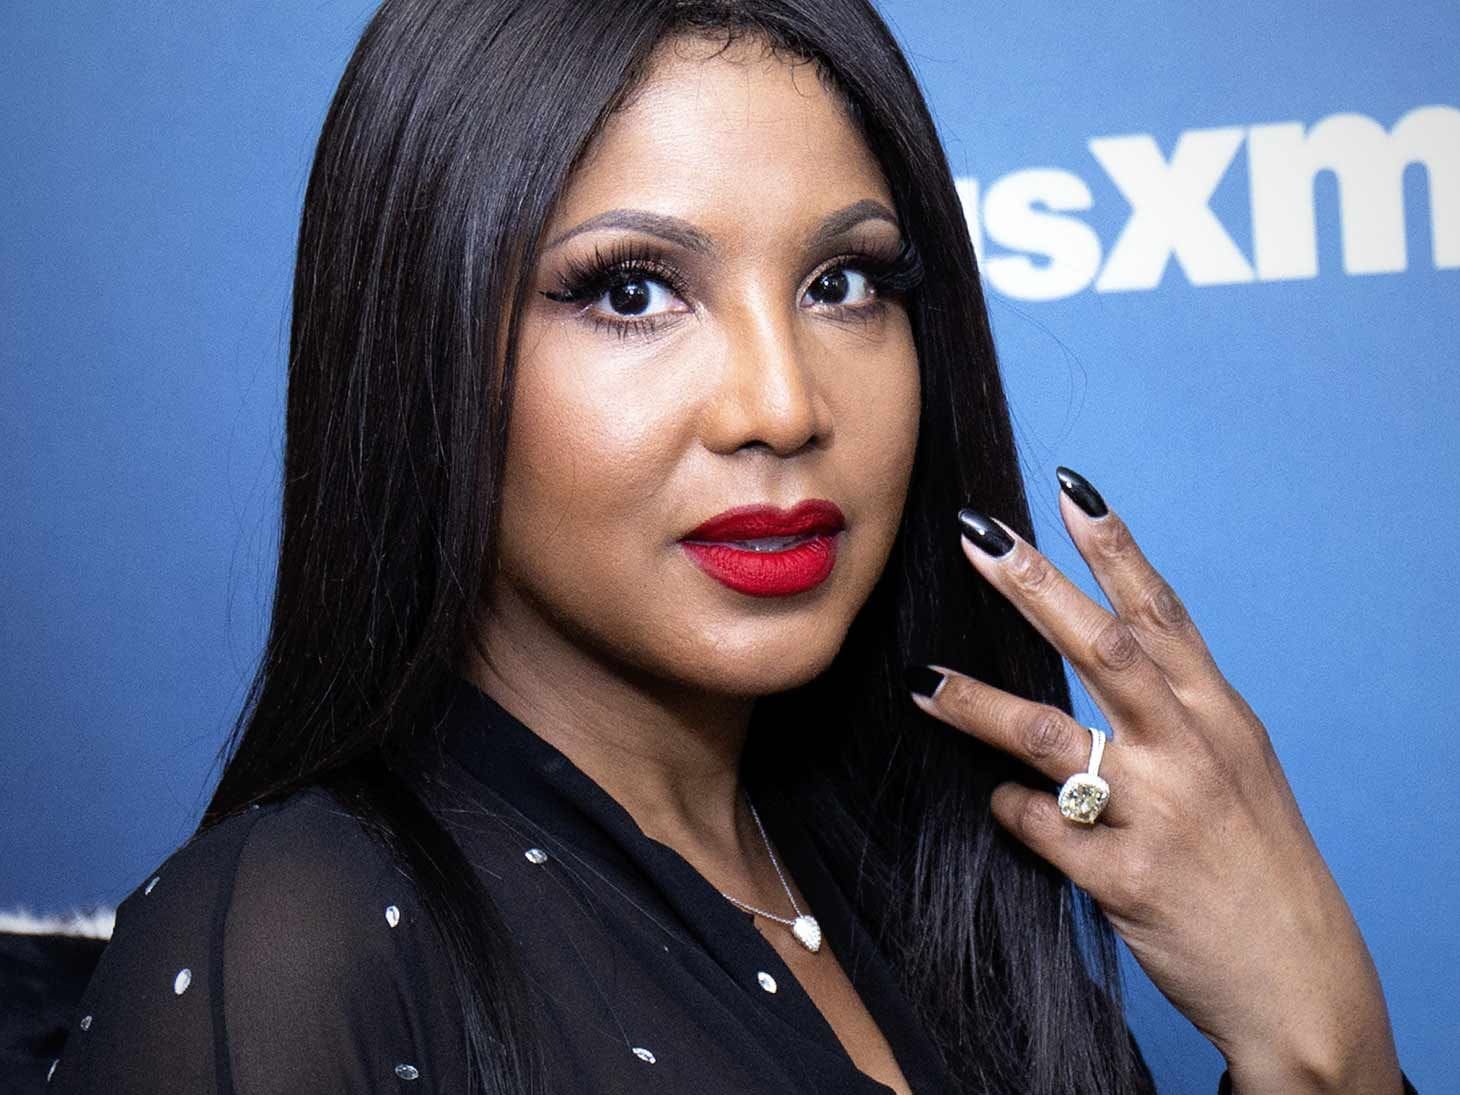 Toni Braxton Shares Footage From Behind The Scenes Of 'Do It' Song Making